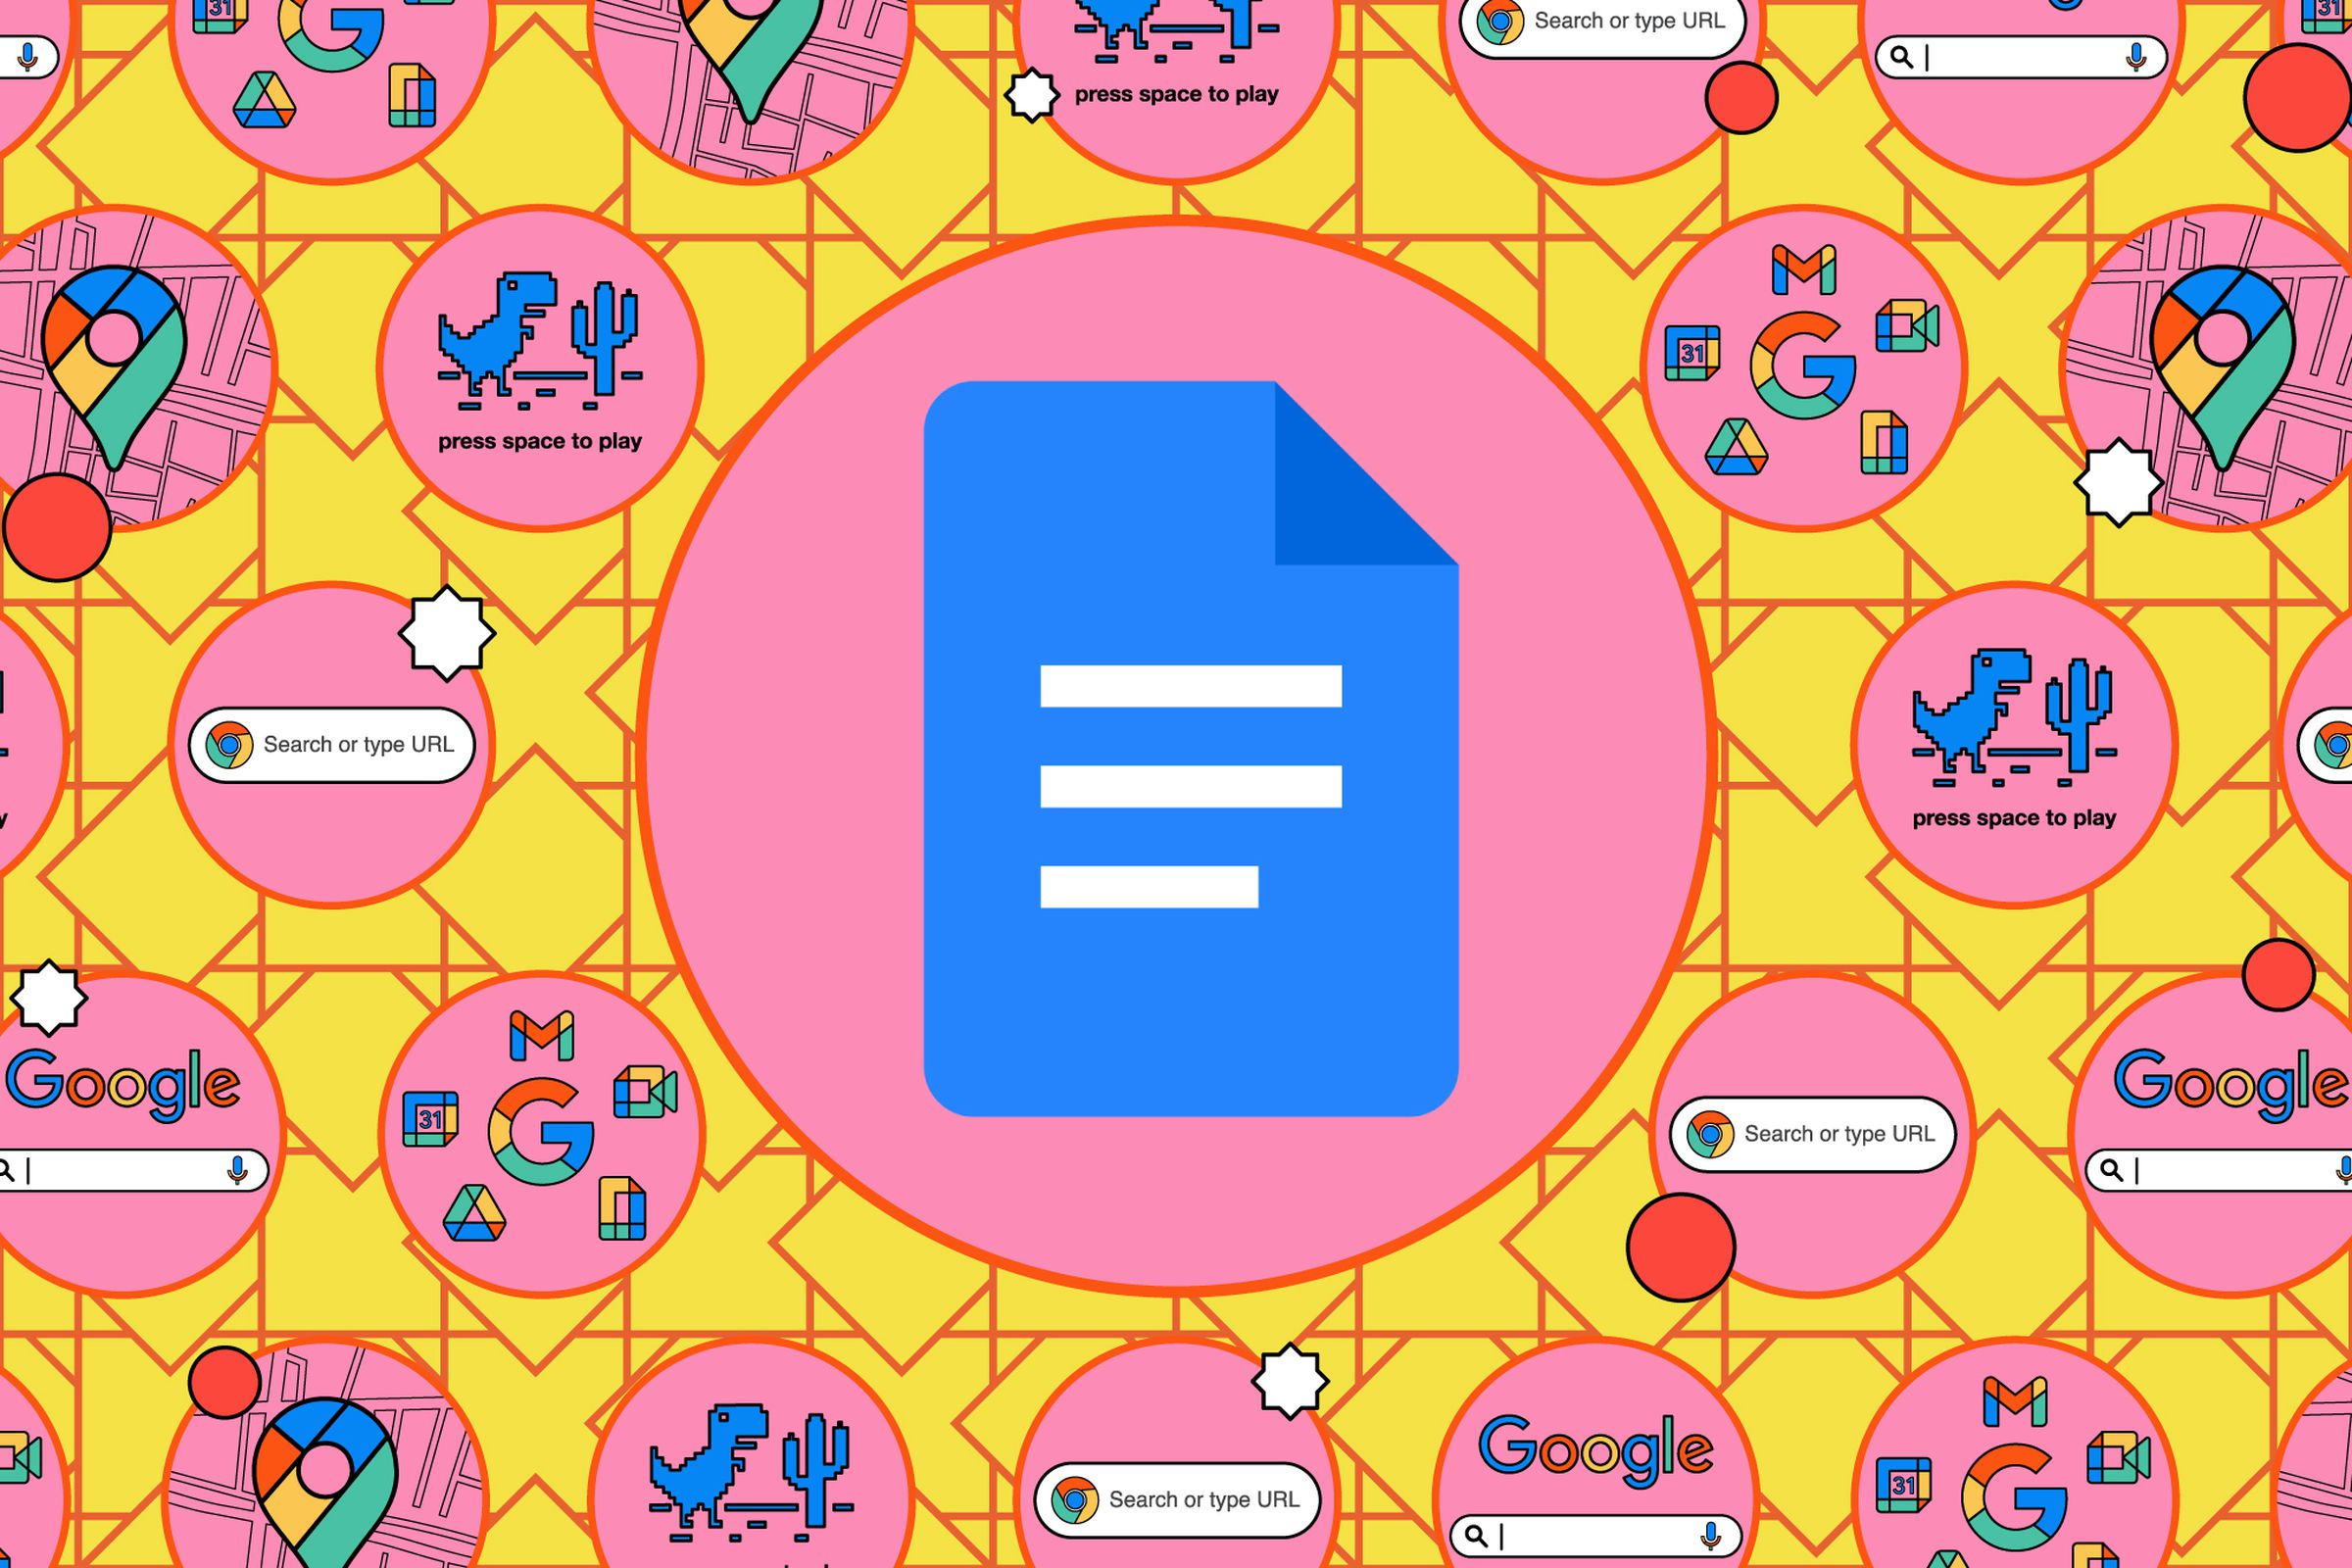 Google Docs icon inside of a pink circle and surrounded by small illustrations.